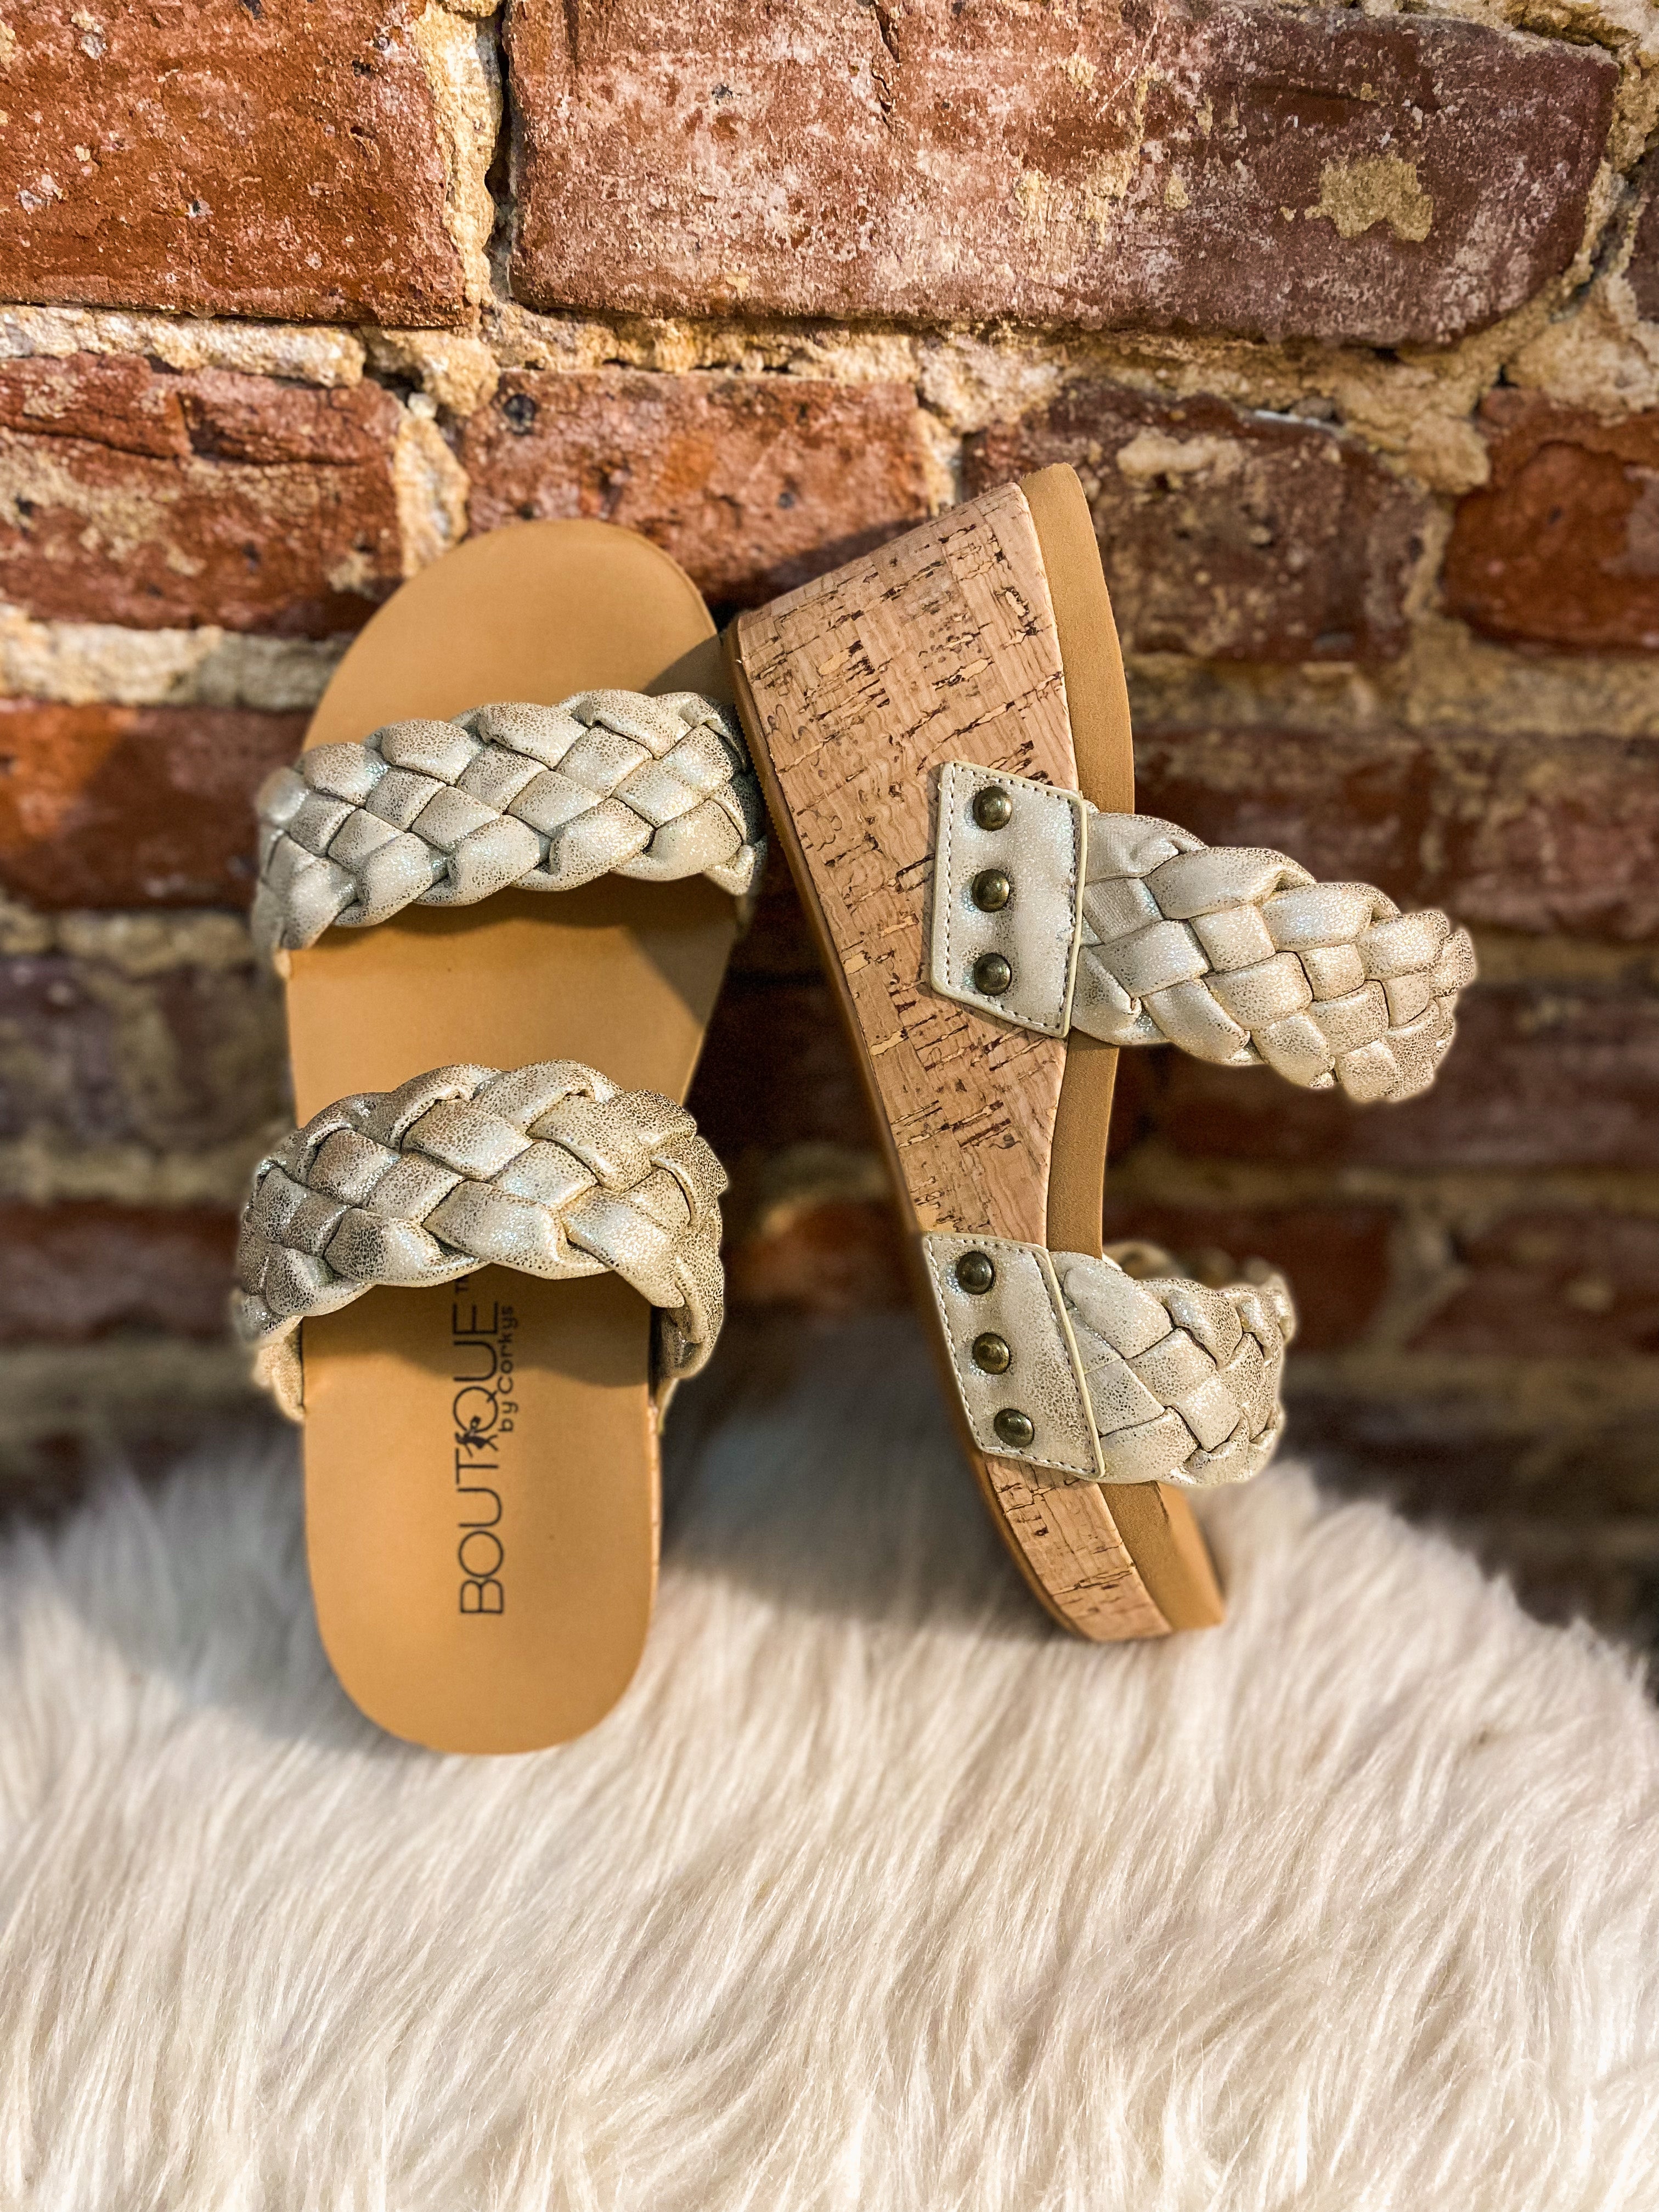 Delightful Gold Shimmer Braided Boutique by Corkys Wedge